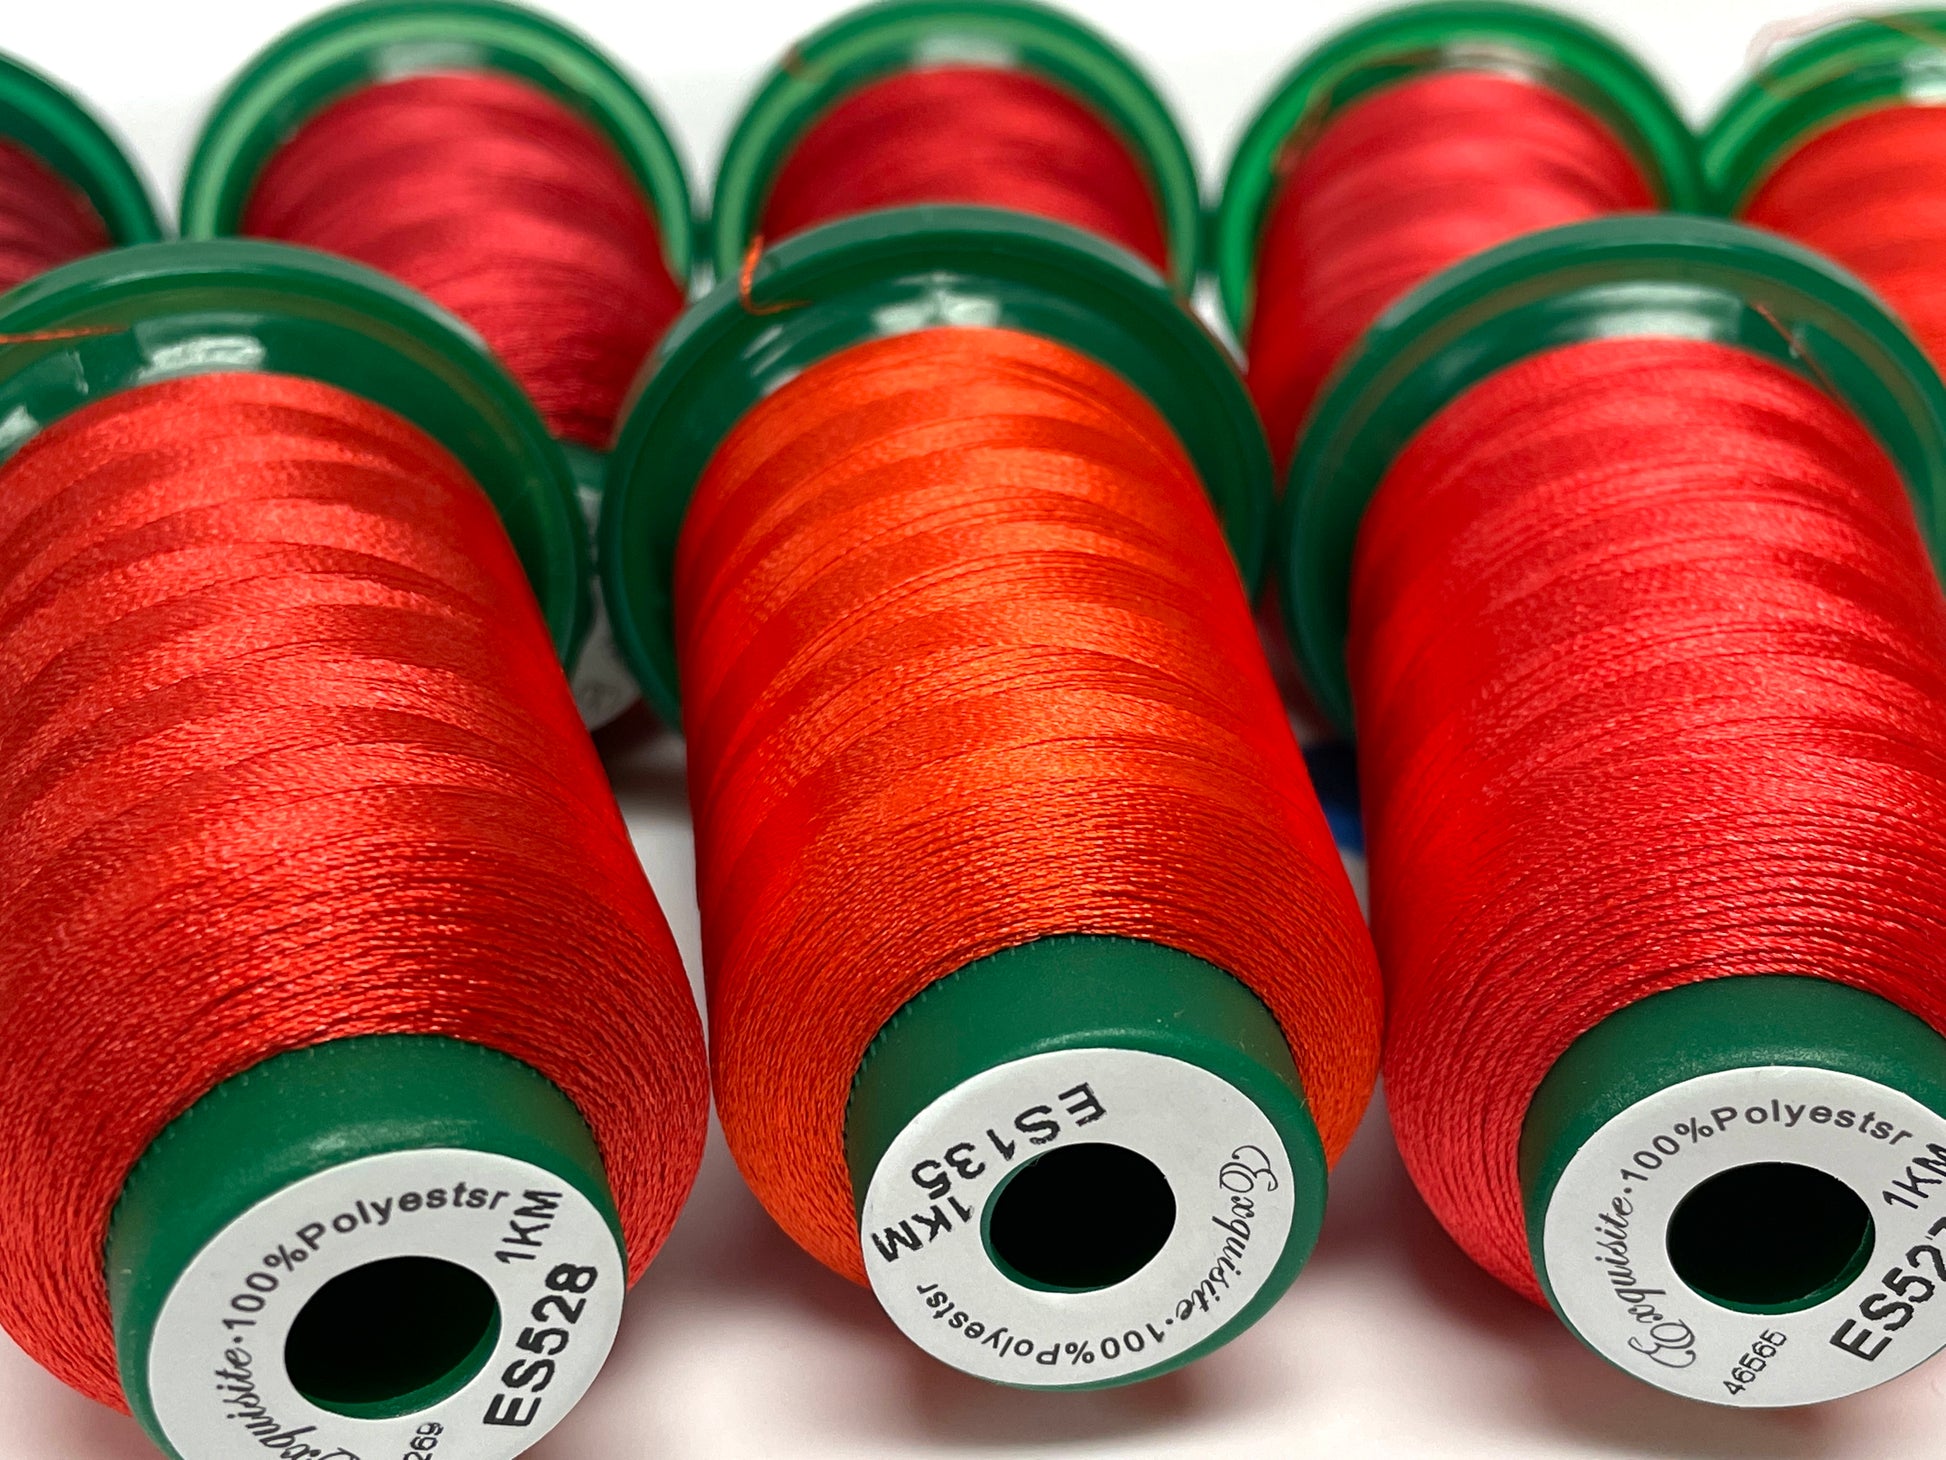 Polyester Embroidery Thread - Scarlet